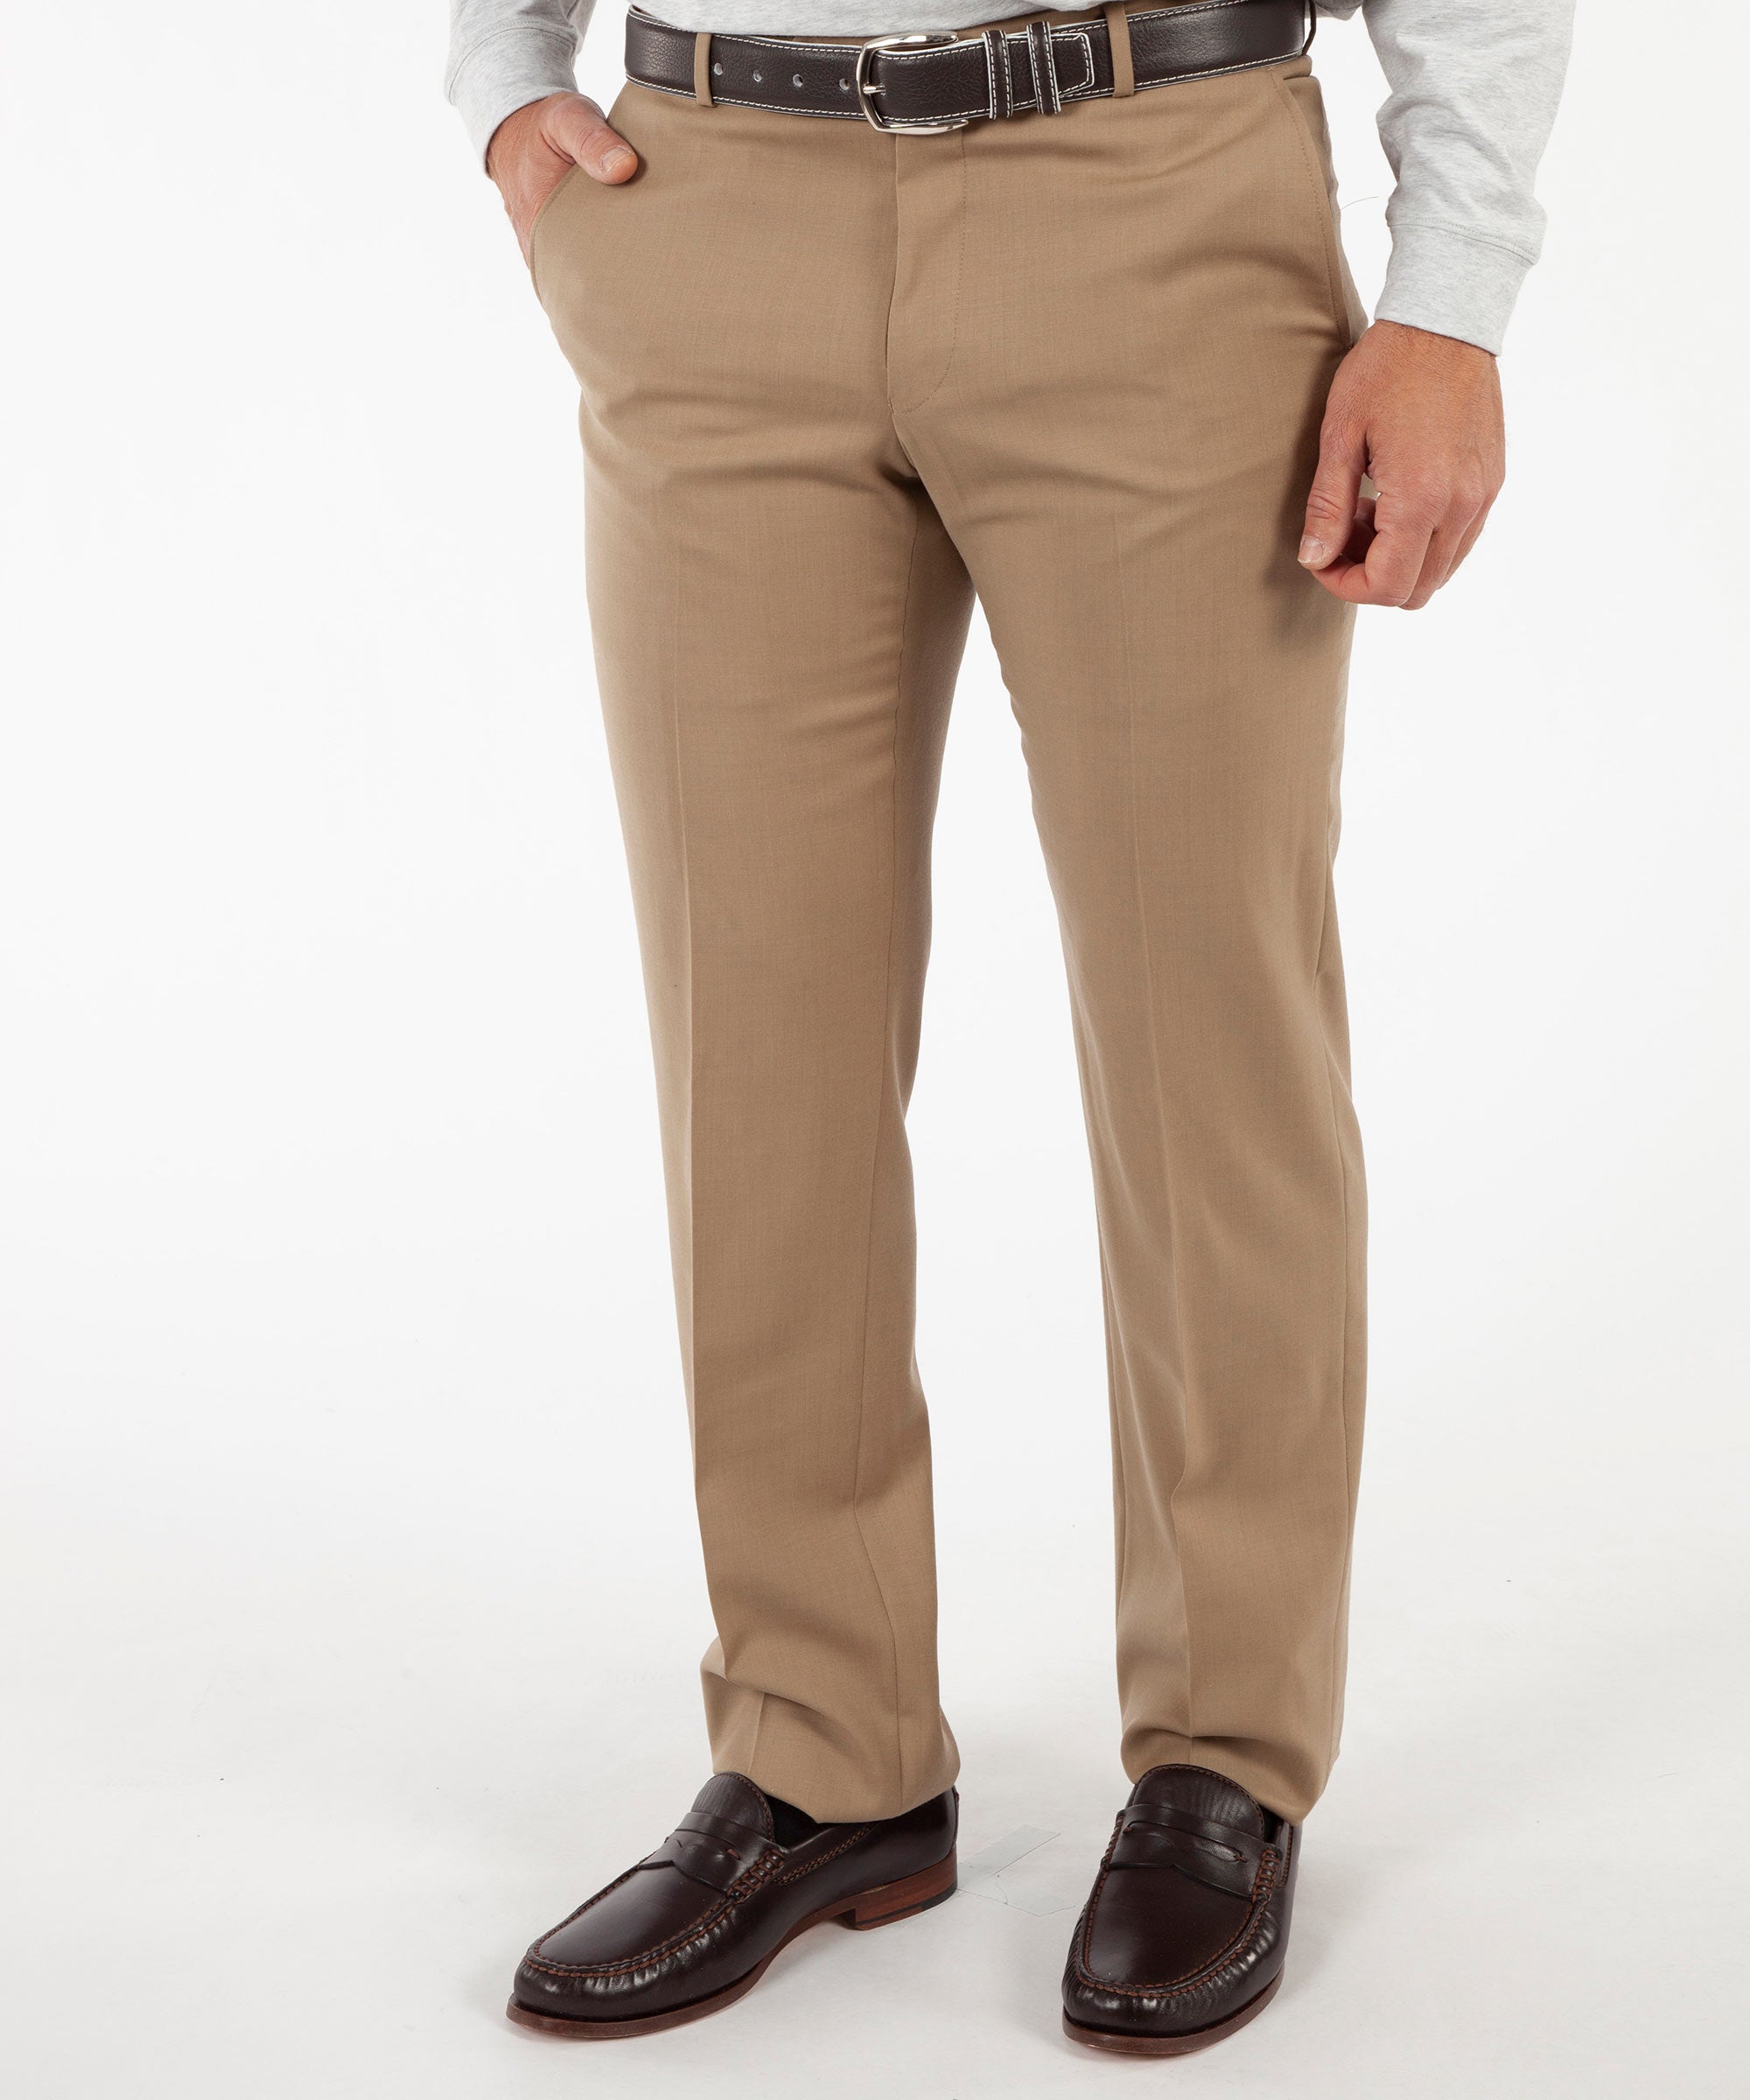 Grand Le Mar | Navy Wool Gurkha Trousers Tailored Comfort for Dapper Style.